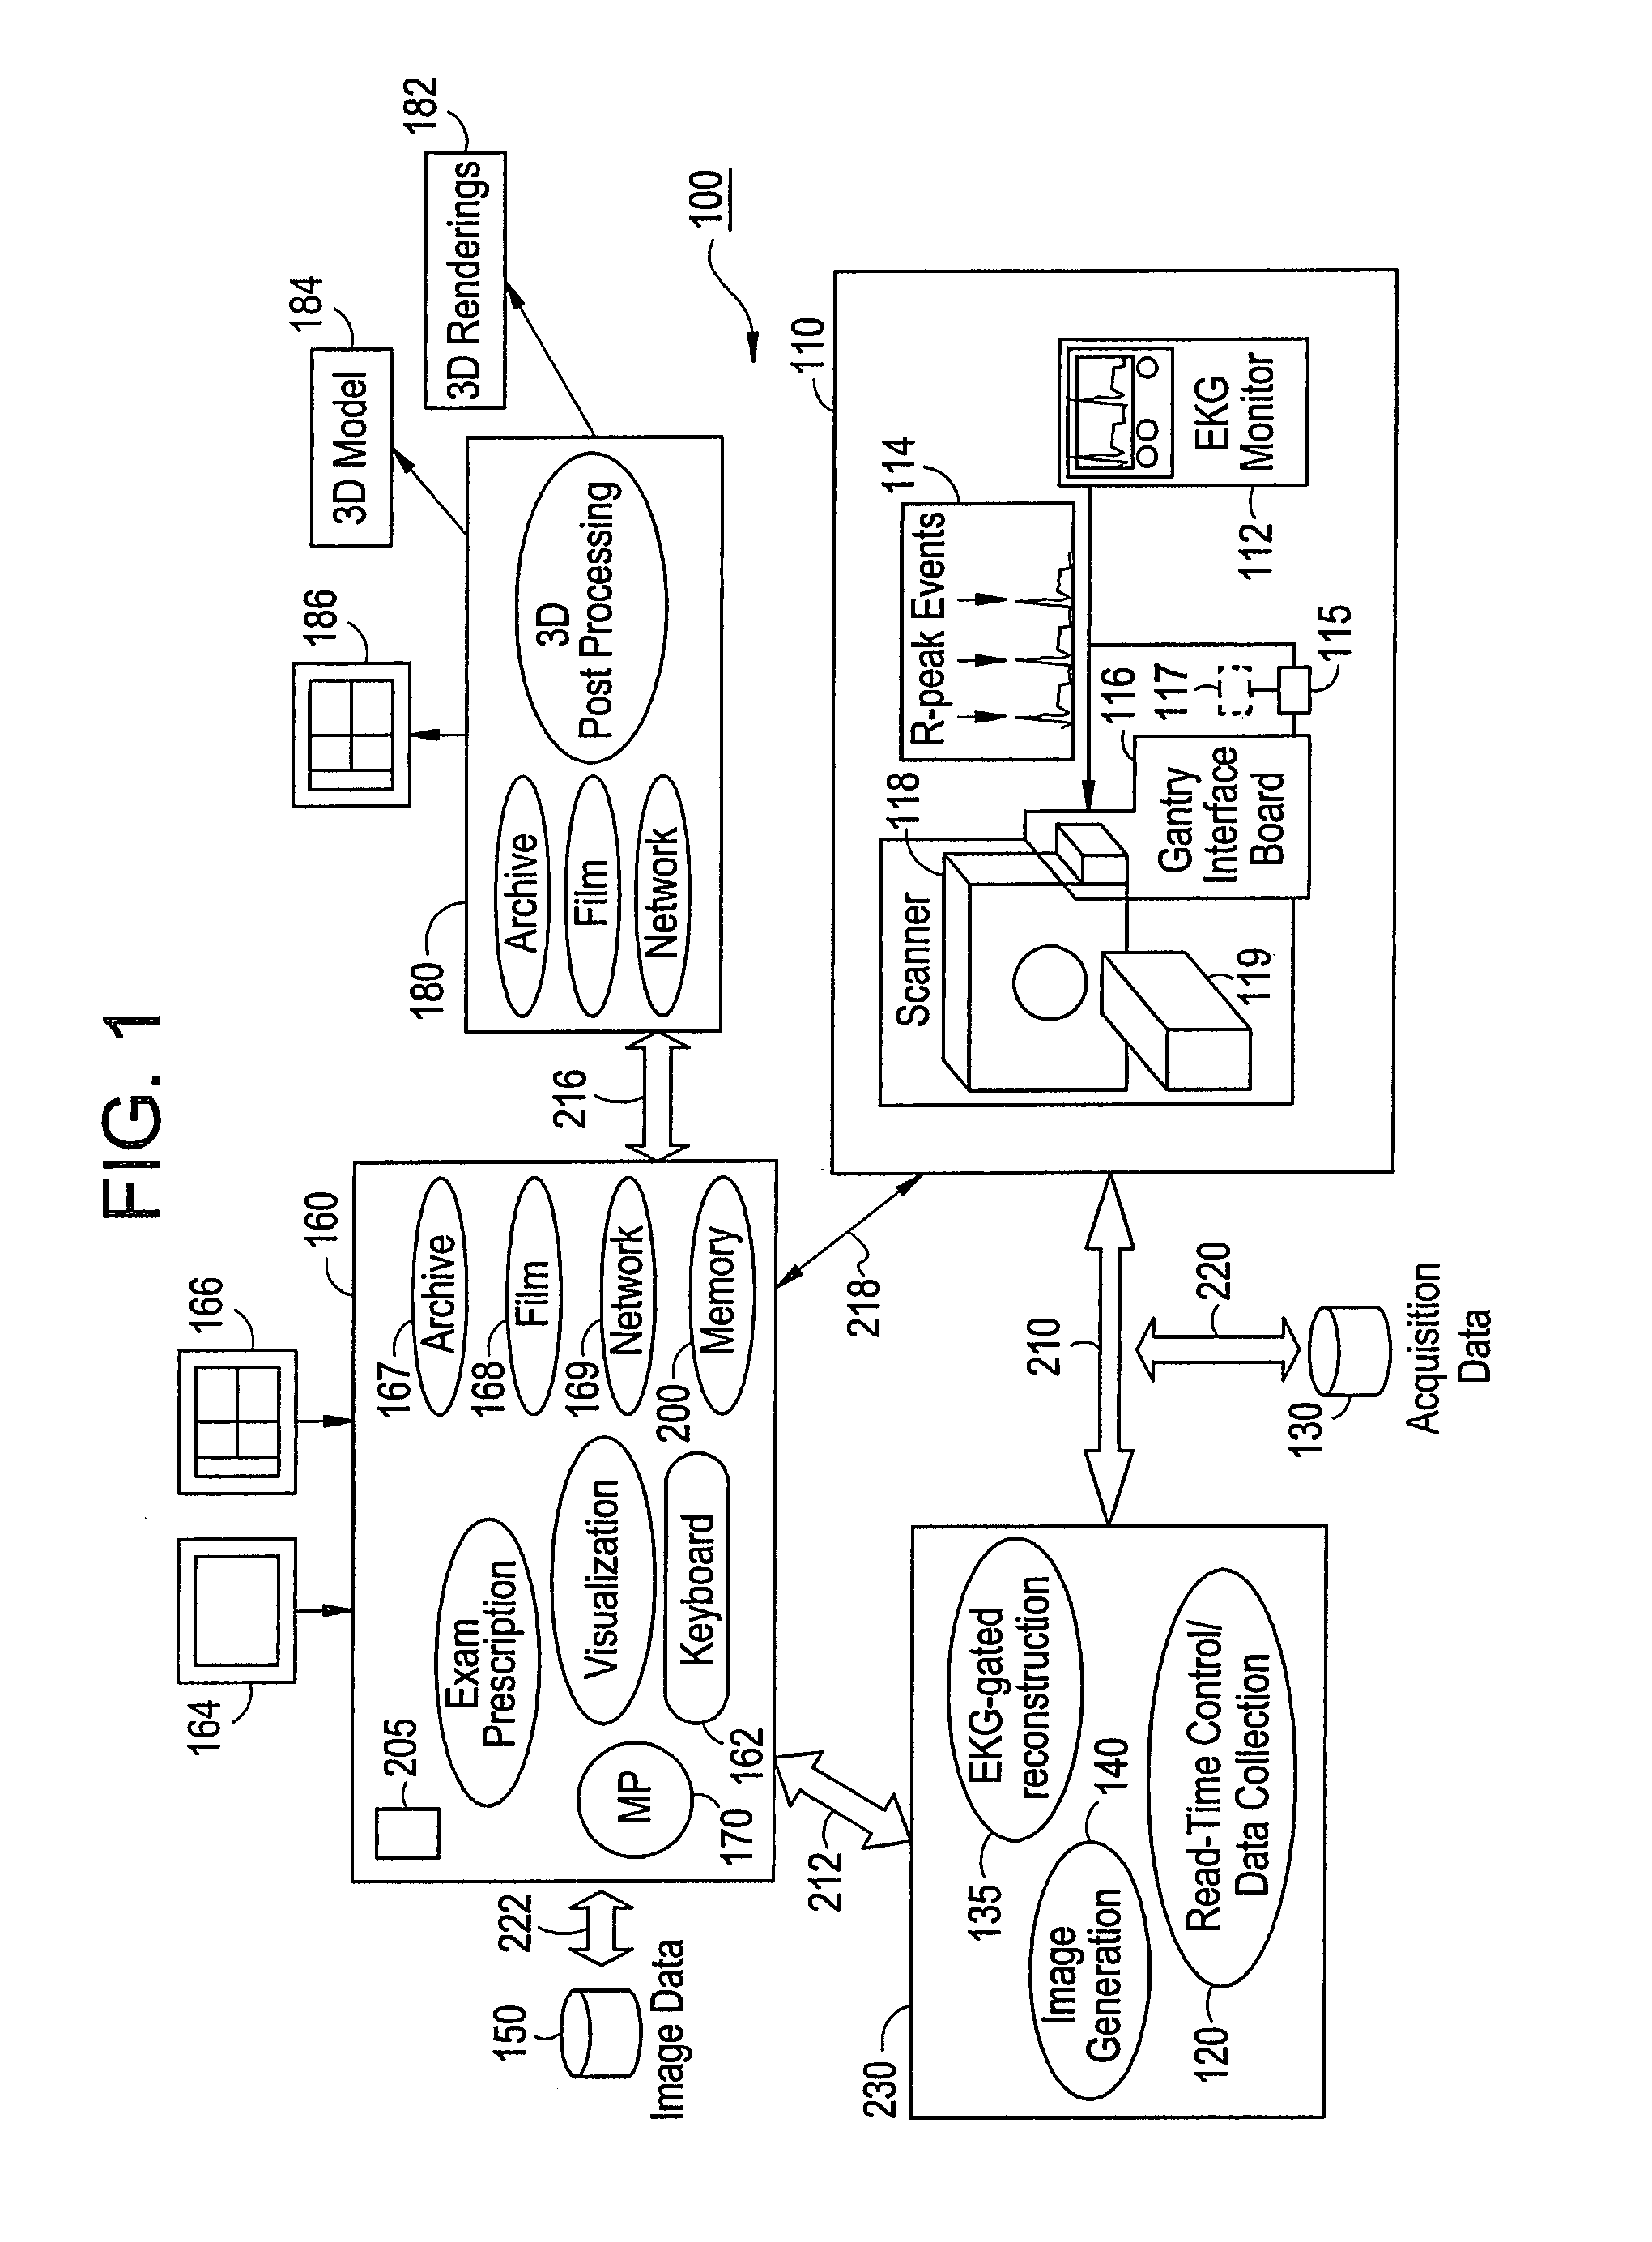 Method, apparatus and product for acquiring cardiac images